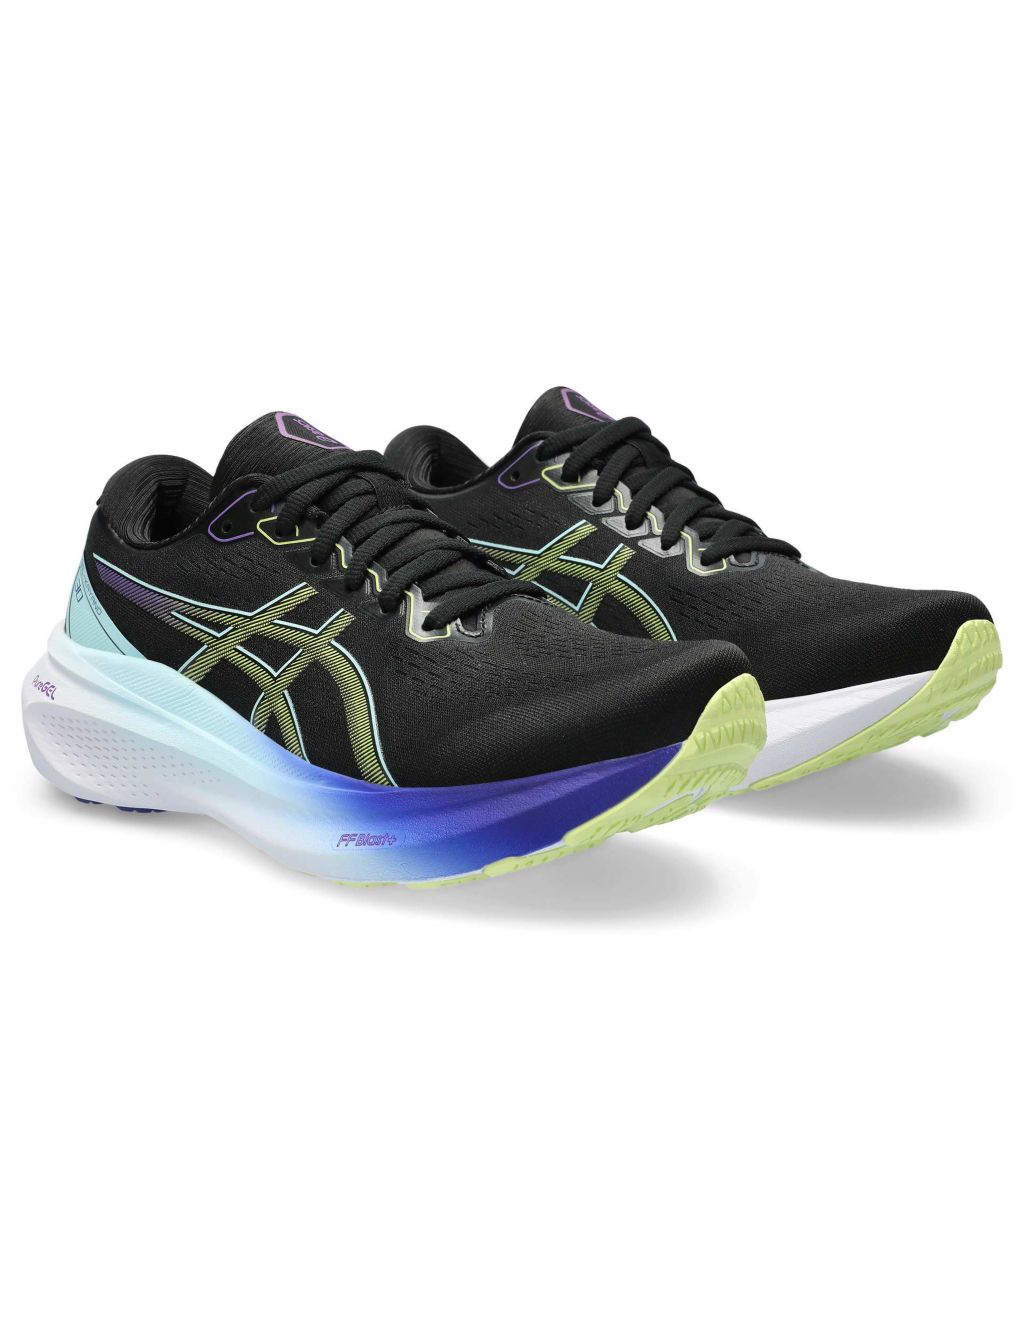 Gel-Kayano 30 Lace Up Trainers image 2